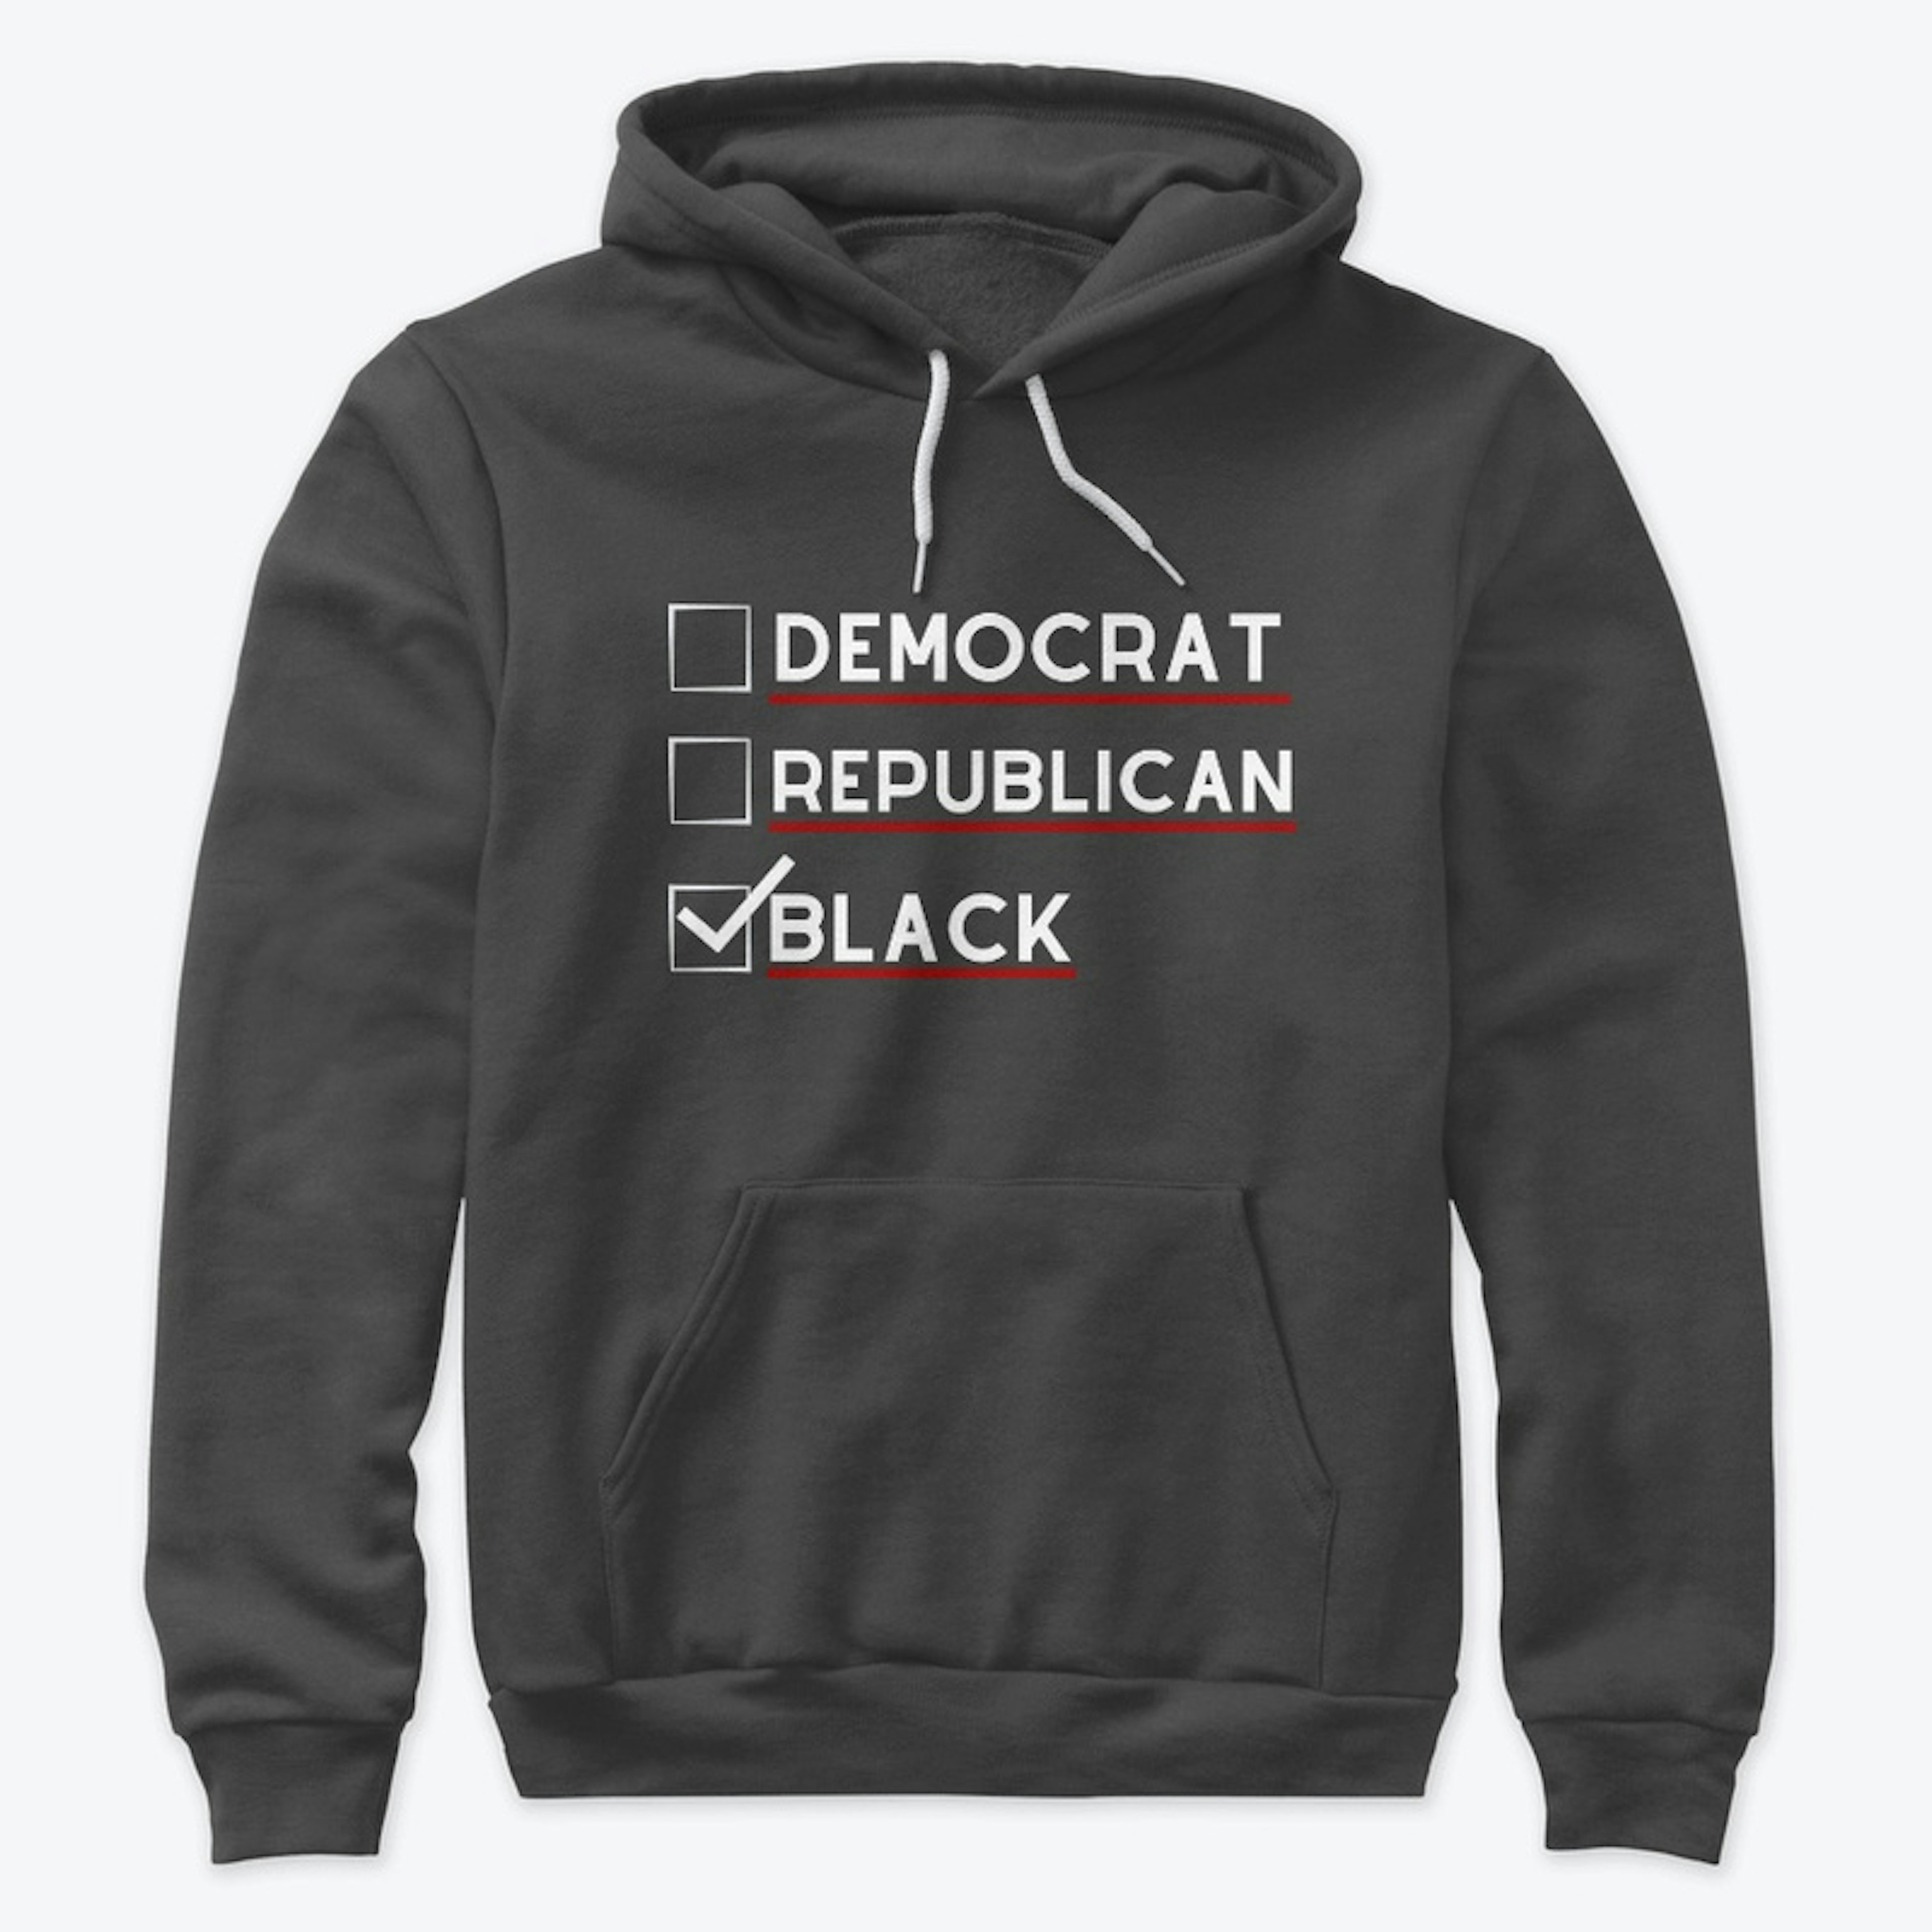 Your Political Party Tee